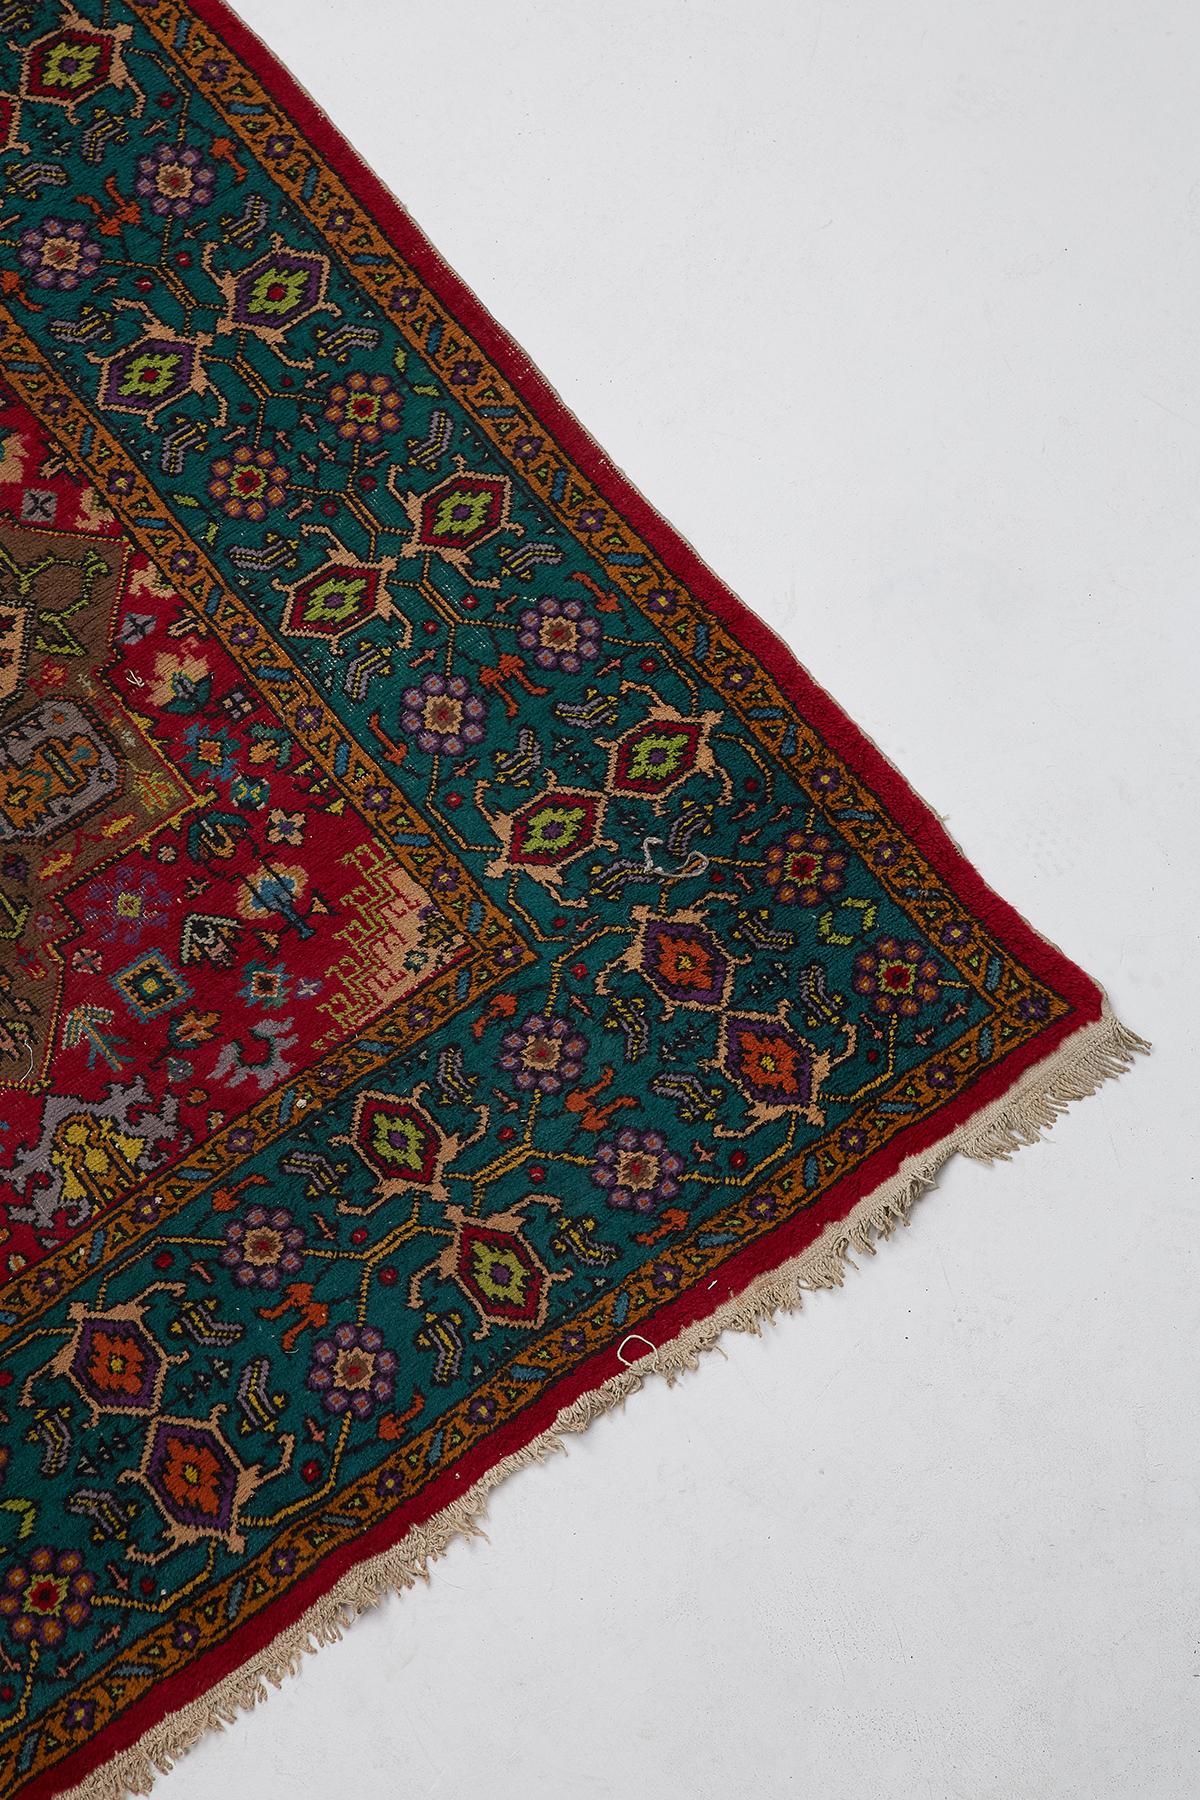 20th century Turkish tribal style carpet featuring geometric patterns in colorful purple, greens, and blues with a red ground. Adorned with multiple hieroglyph symbols and shapes. Vibrant colors with losses as seen in photos.